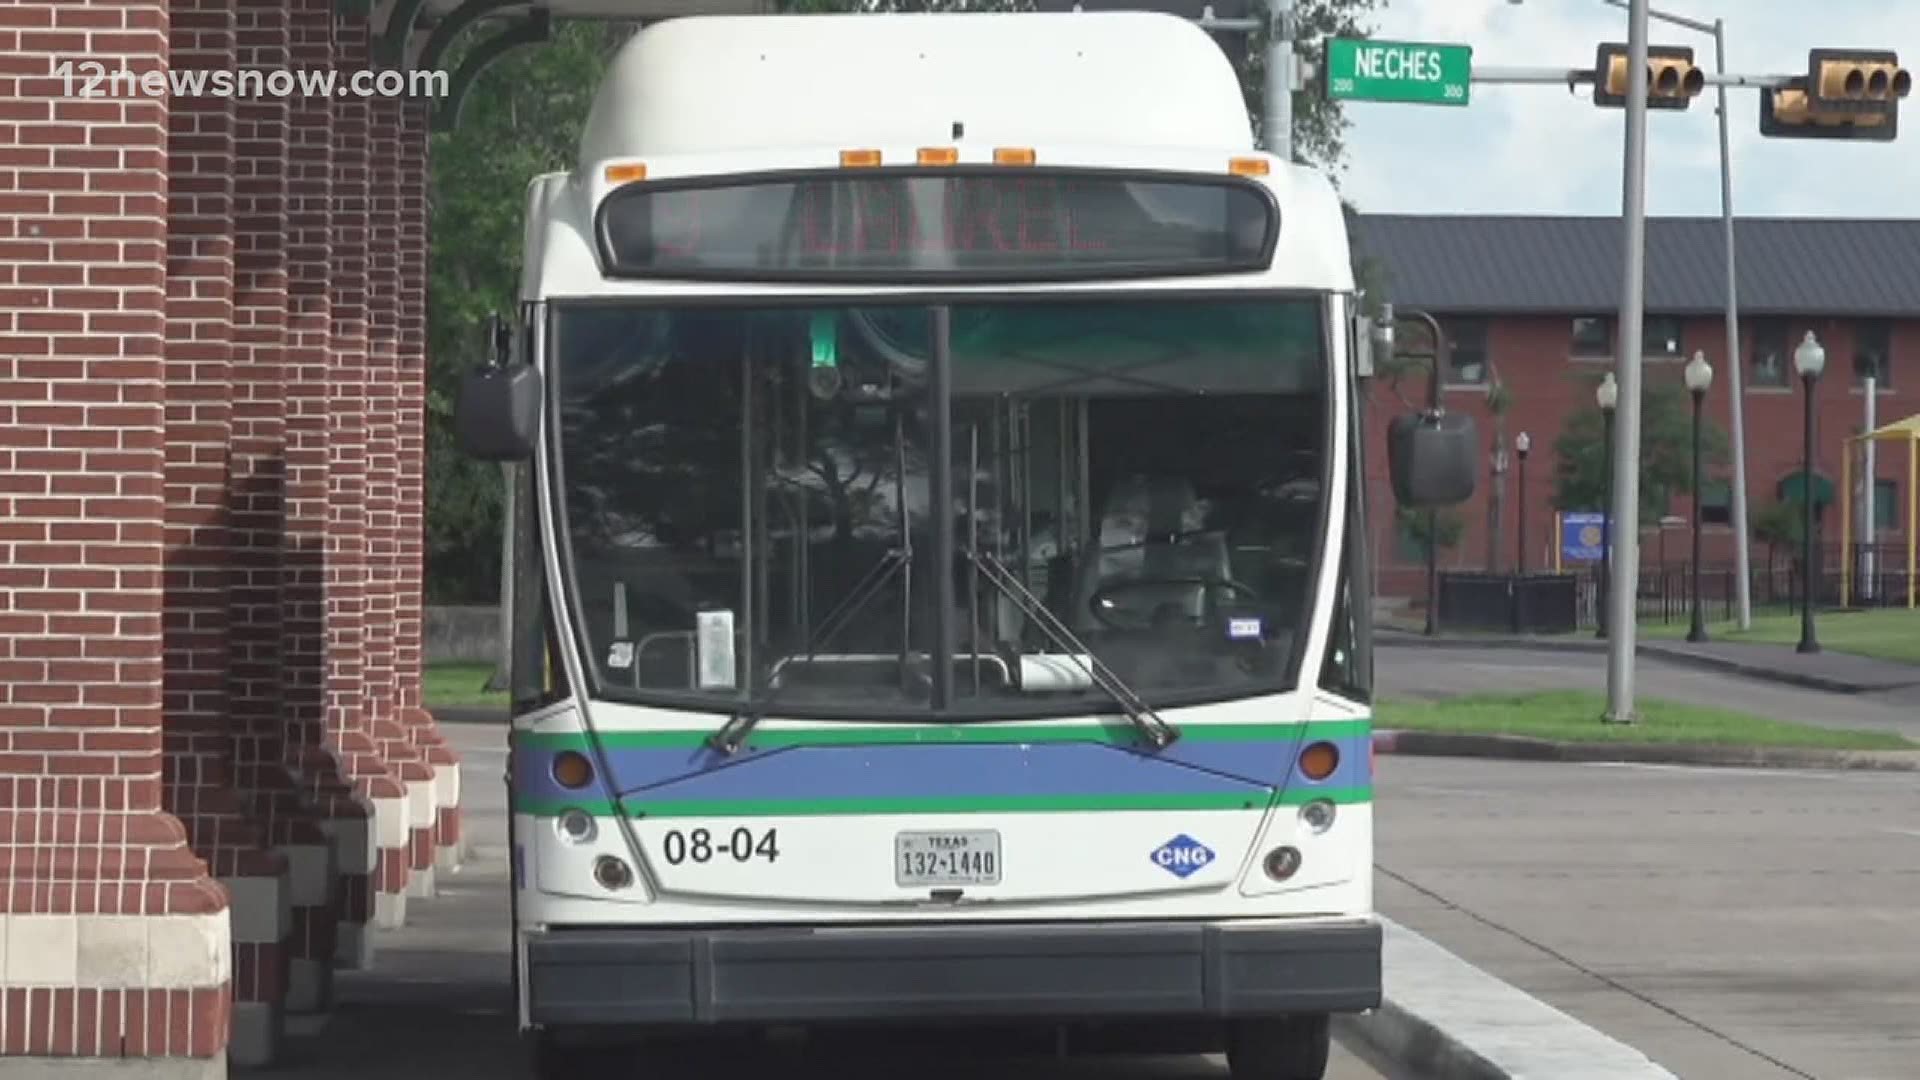 Beaumont Transit management said additional funding requested is not within the approved budget